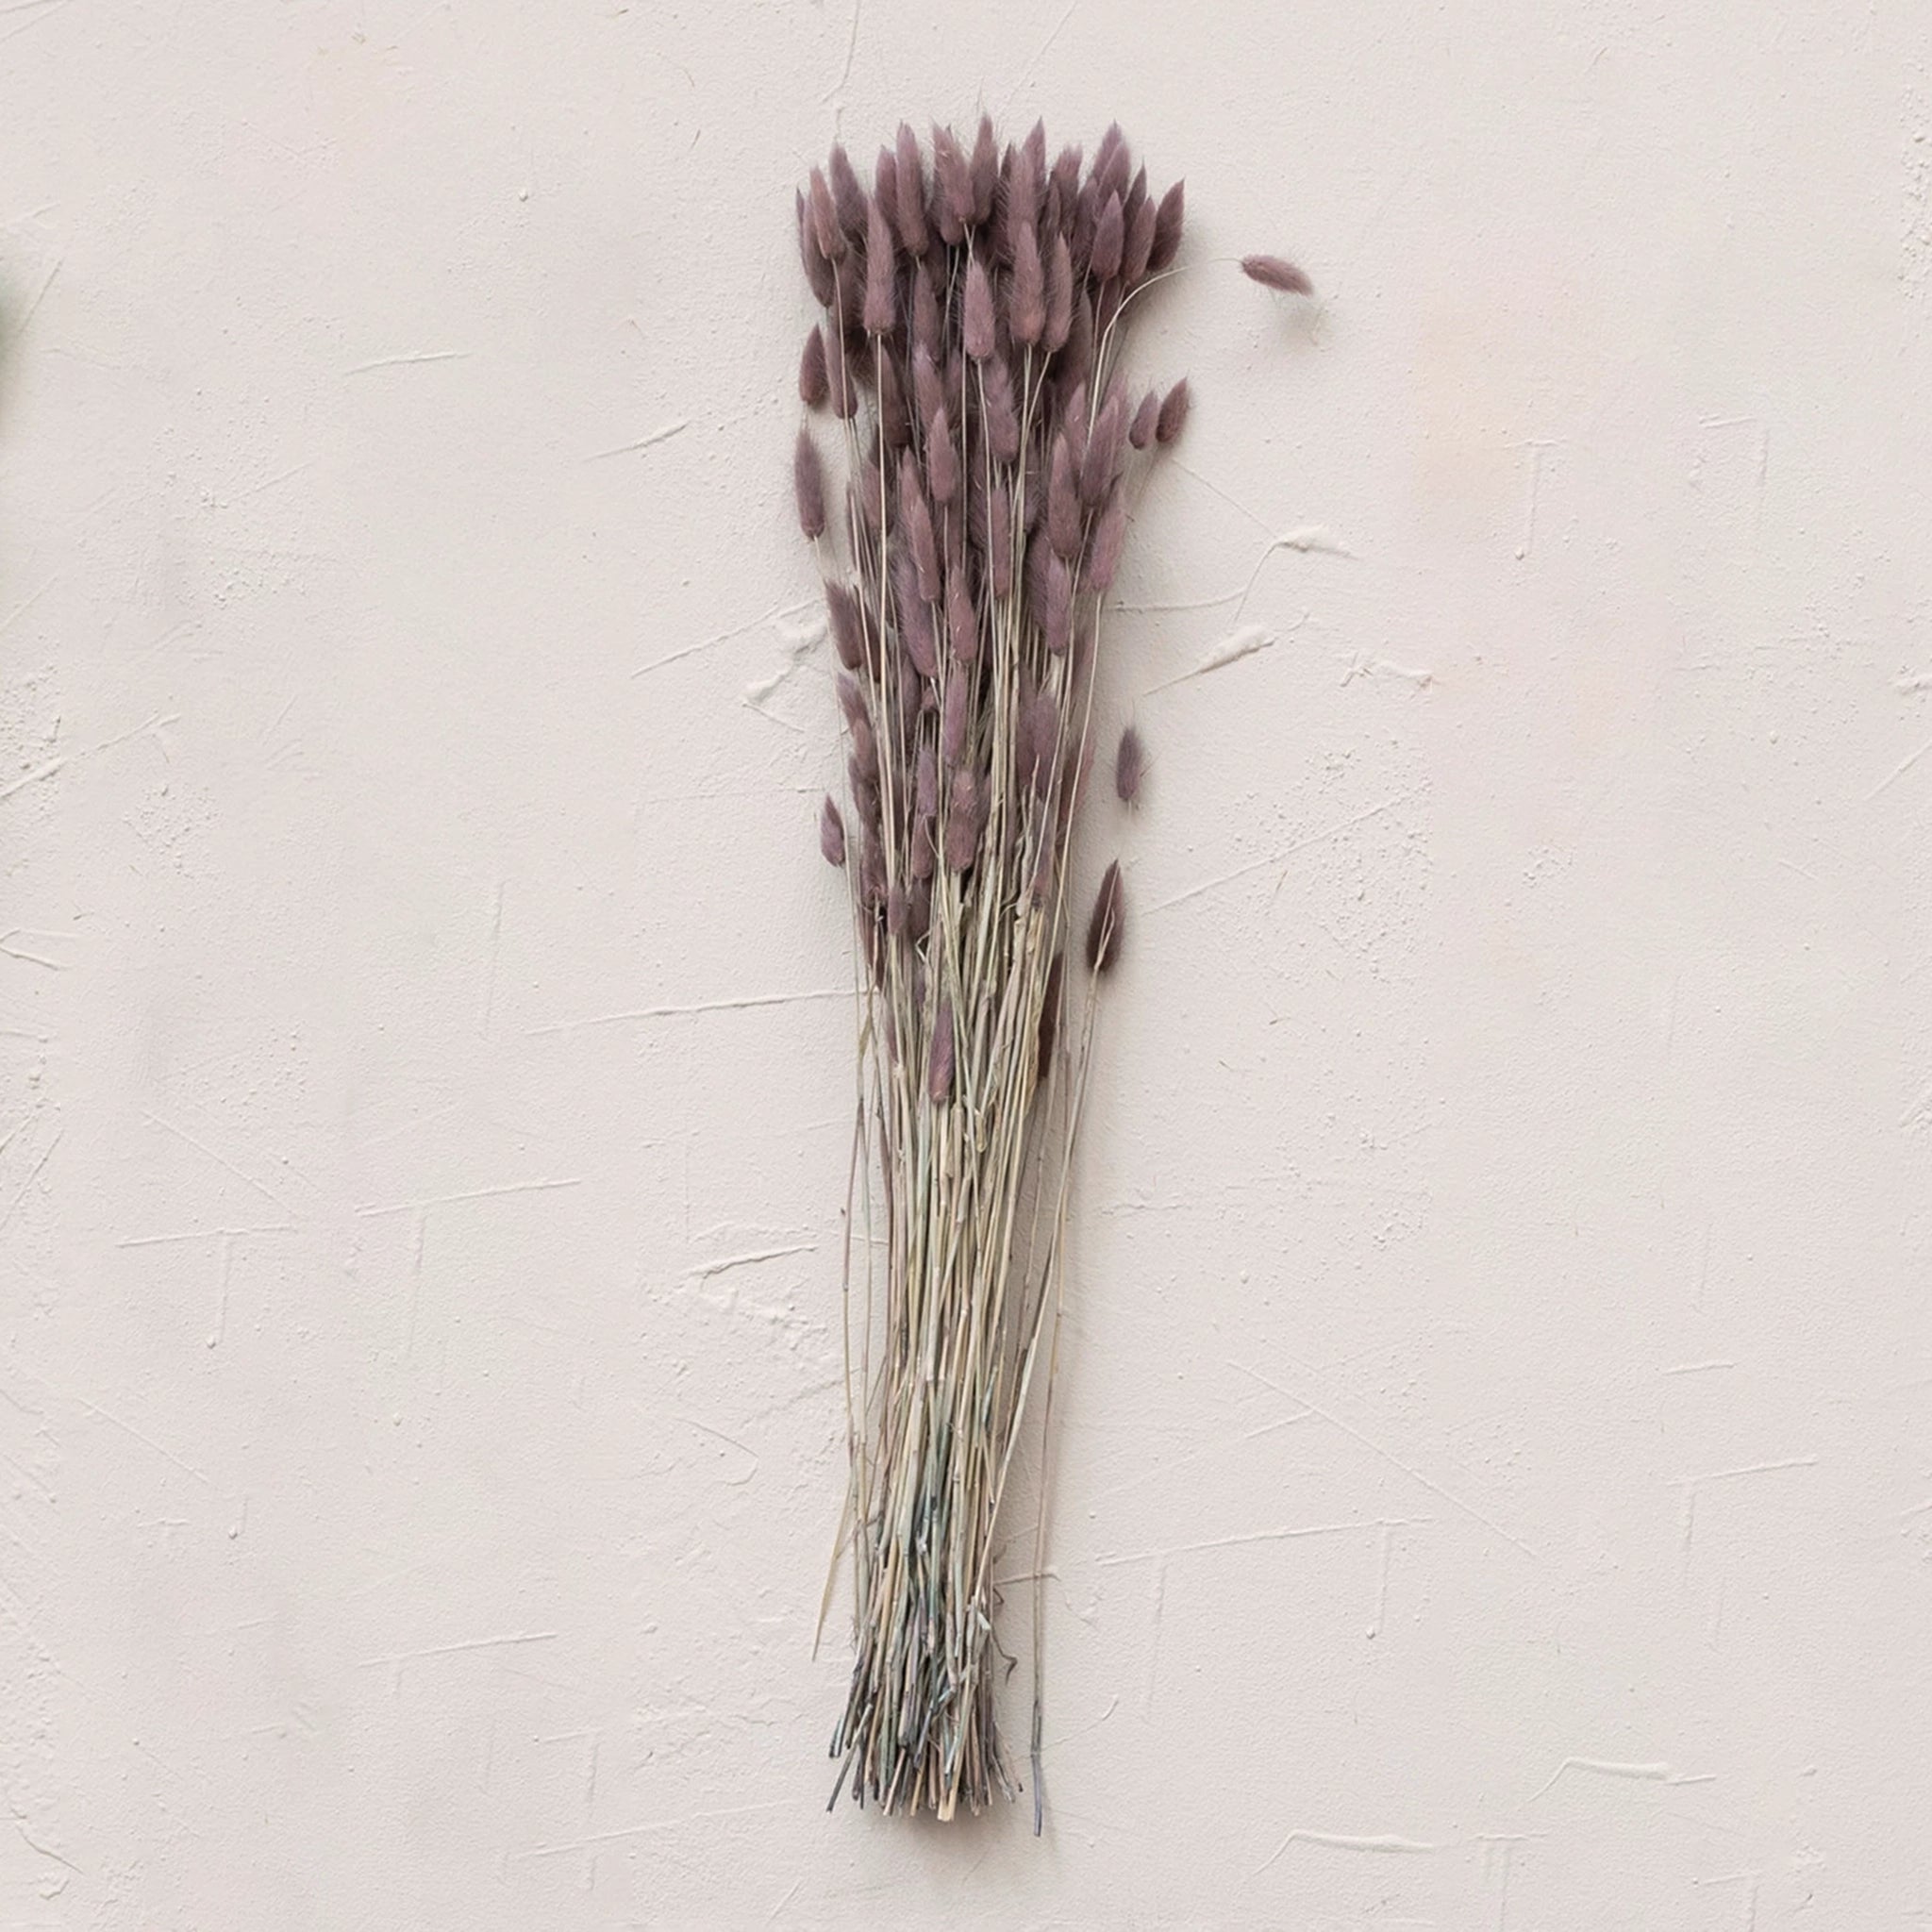 A bundle of dried bunny tails in a lavender shade.